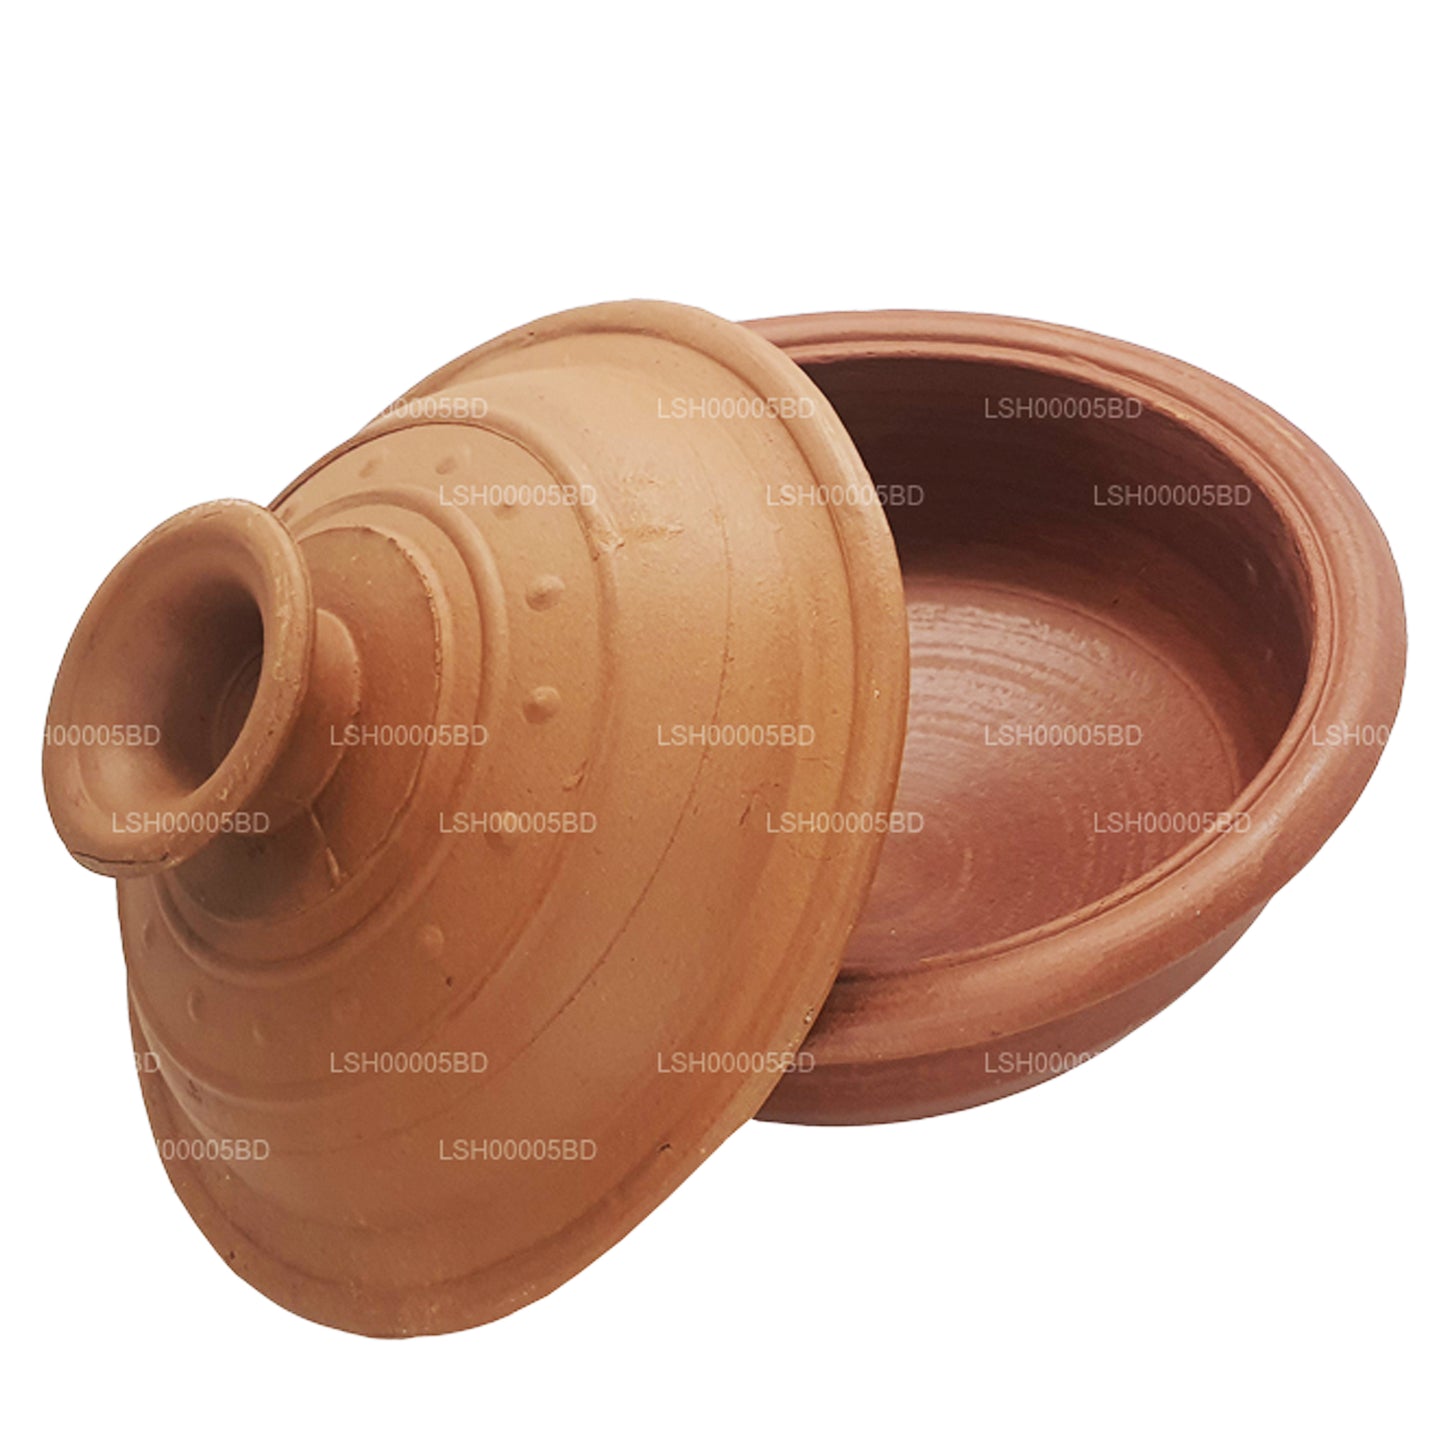 Clay Pot With Lid